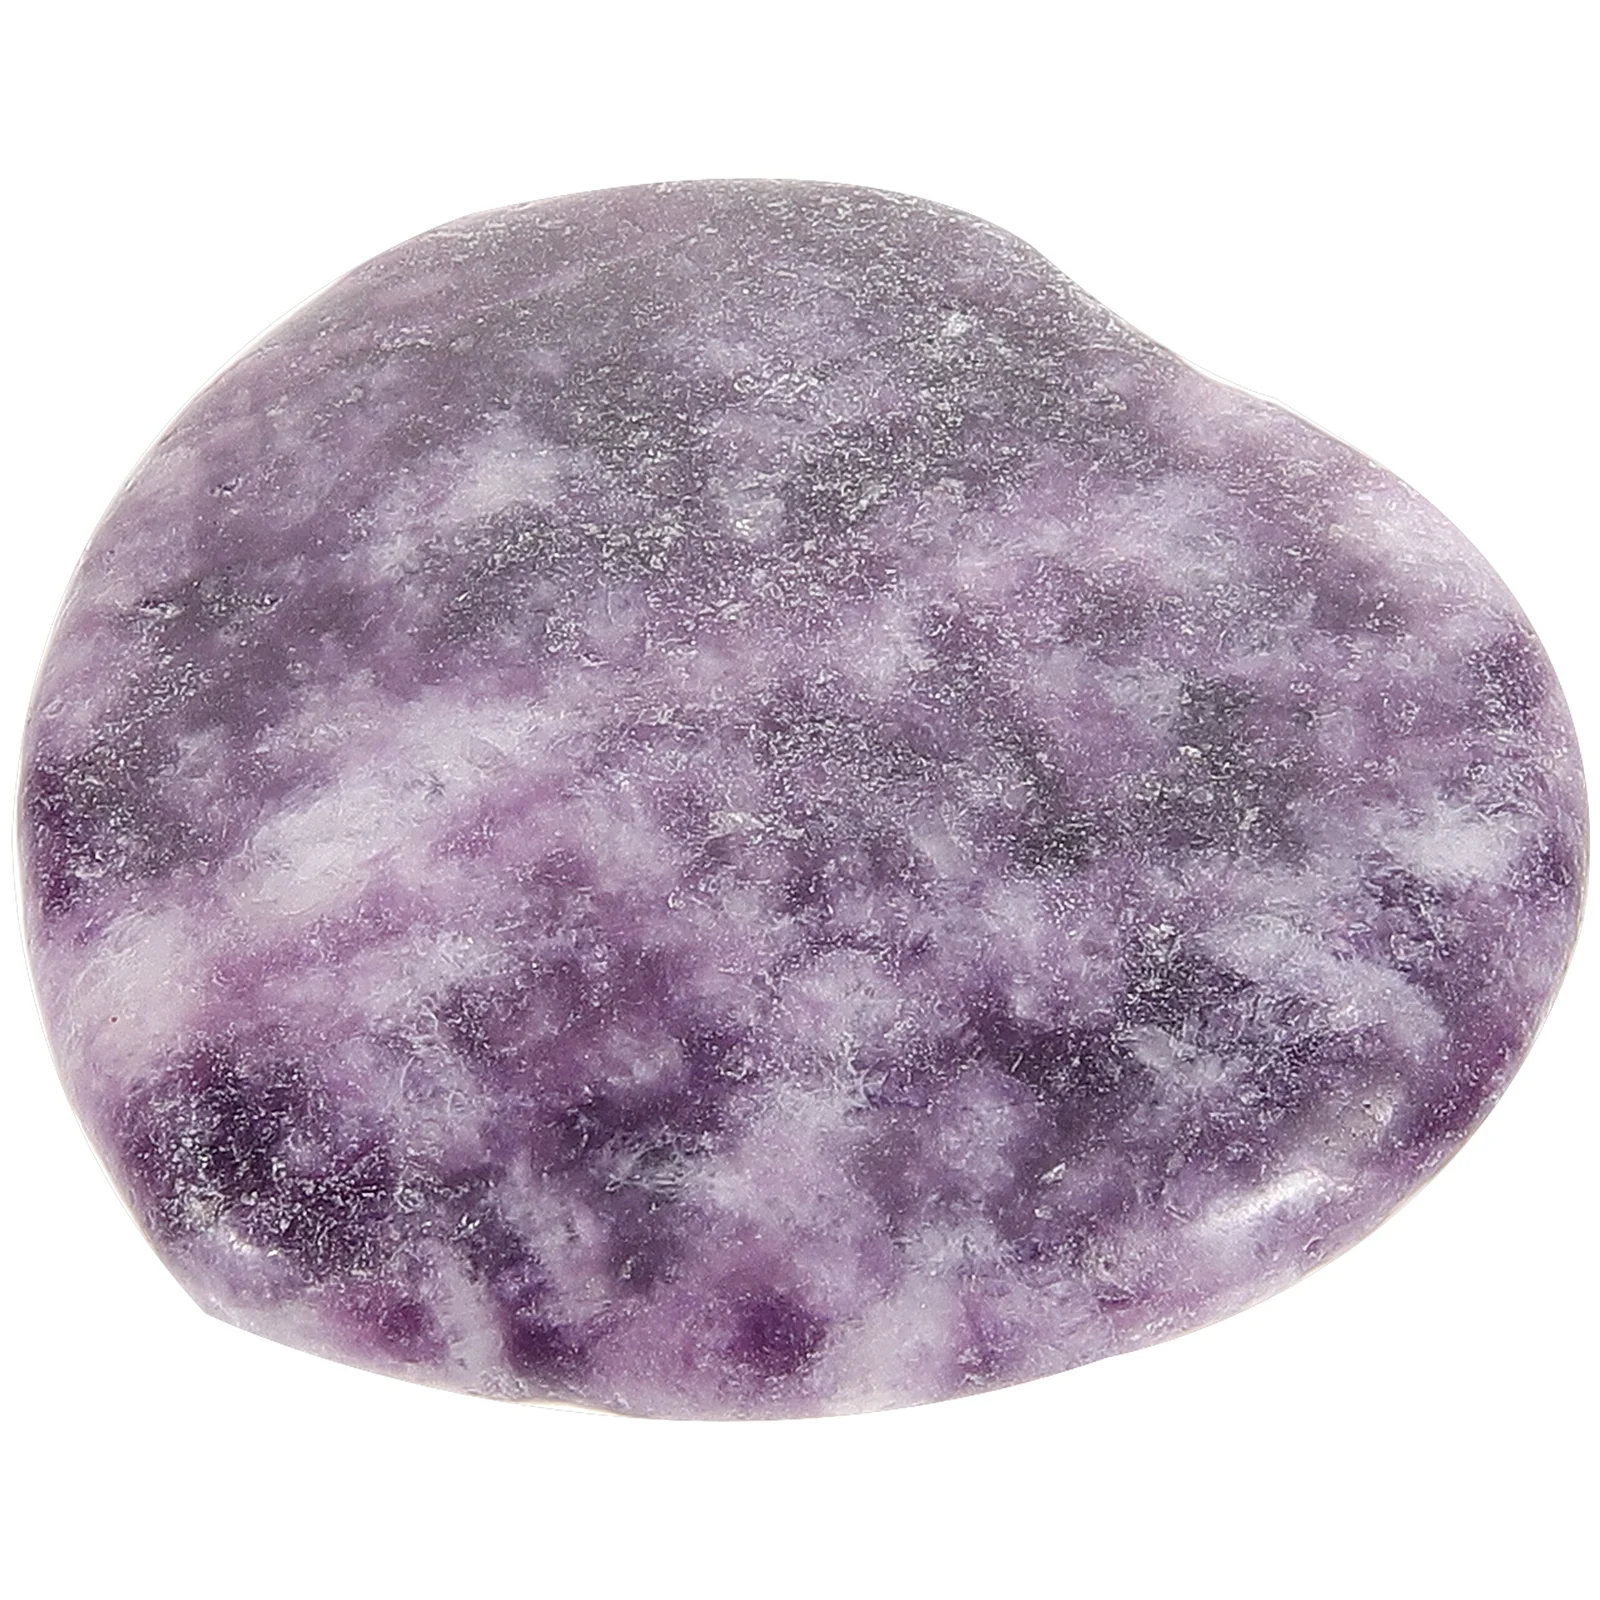 

Relief Worry Stone Stones Anxiety Love Finger Scraping Plate Purple Stress Thumb